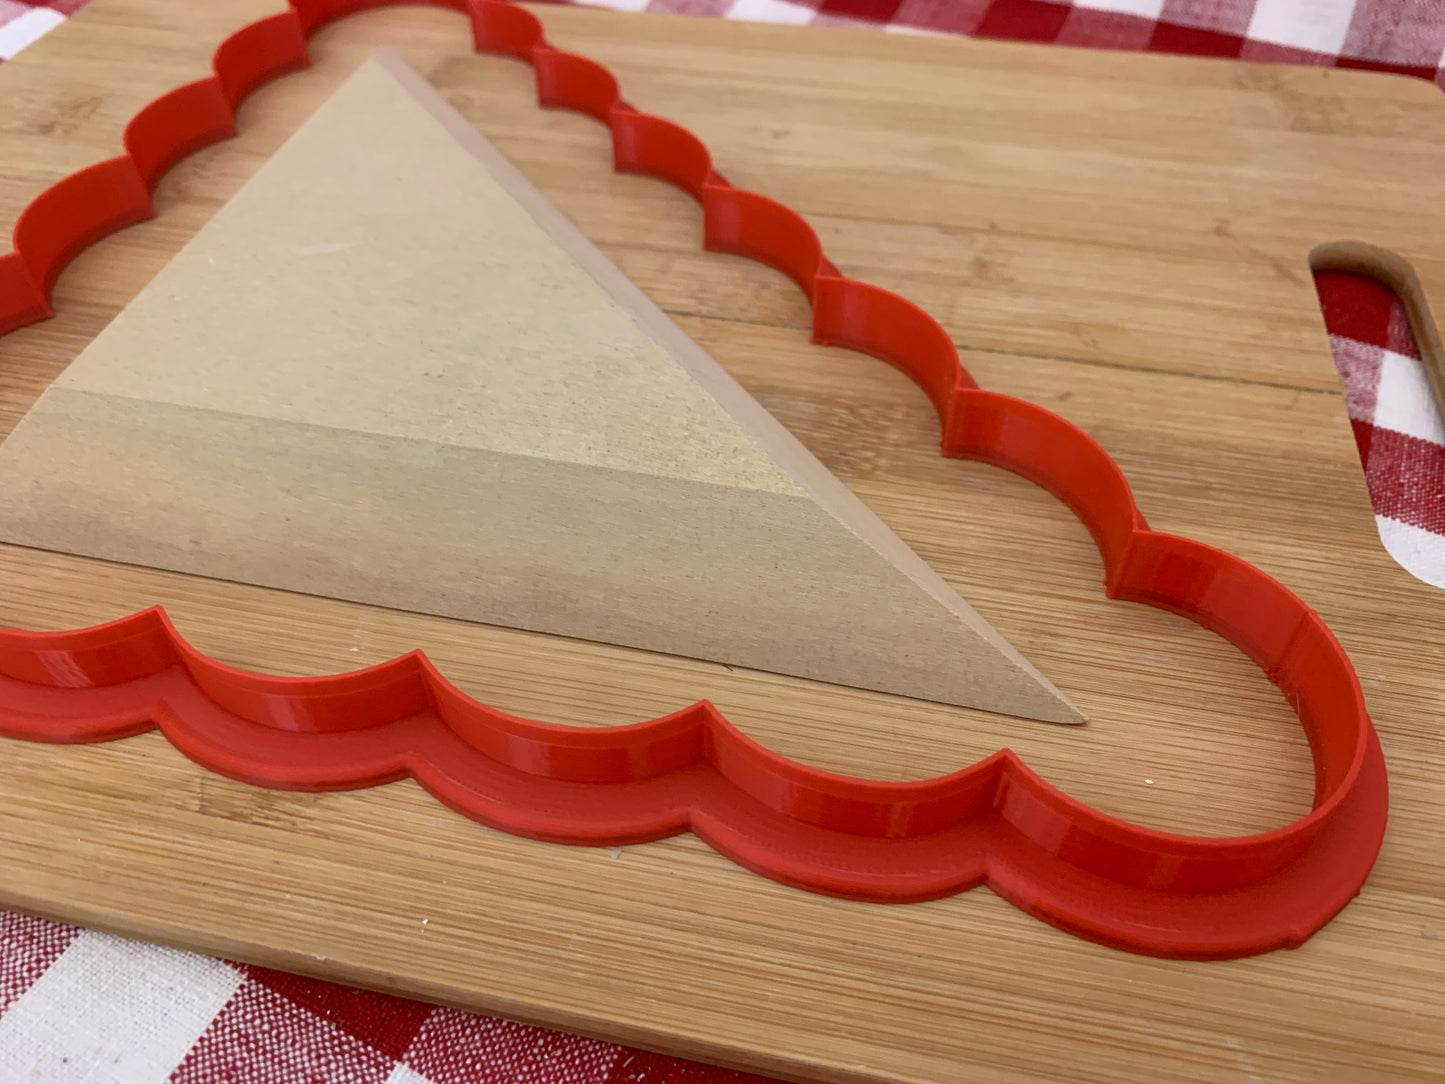 Scalloped triangle, Clay Cutters - Plastic 3D printed, pottery tool, multiple sizes